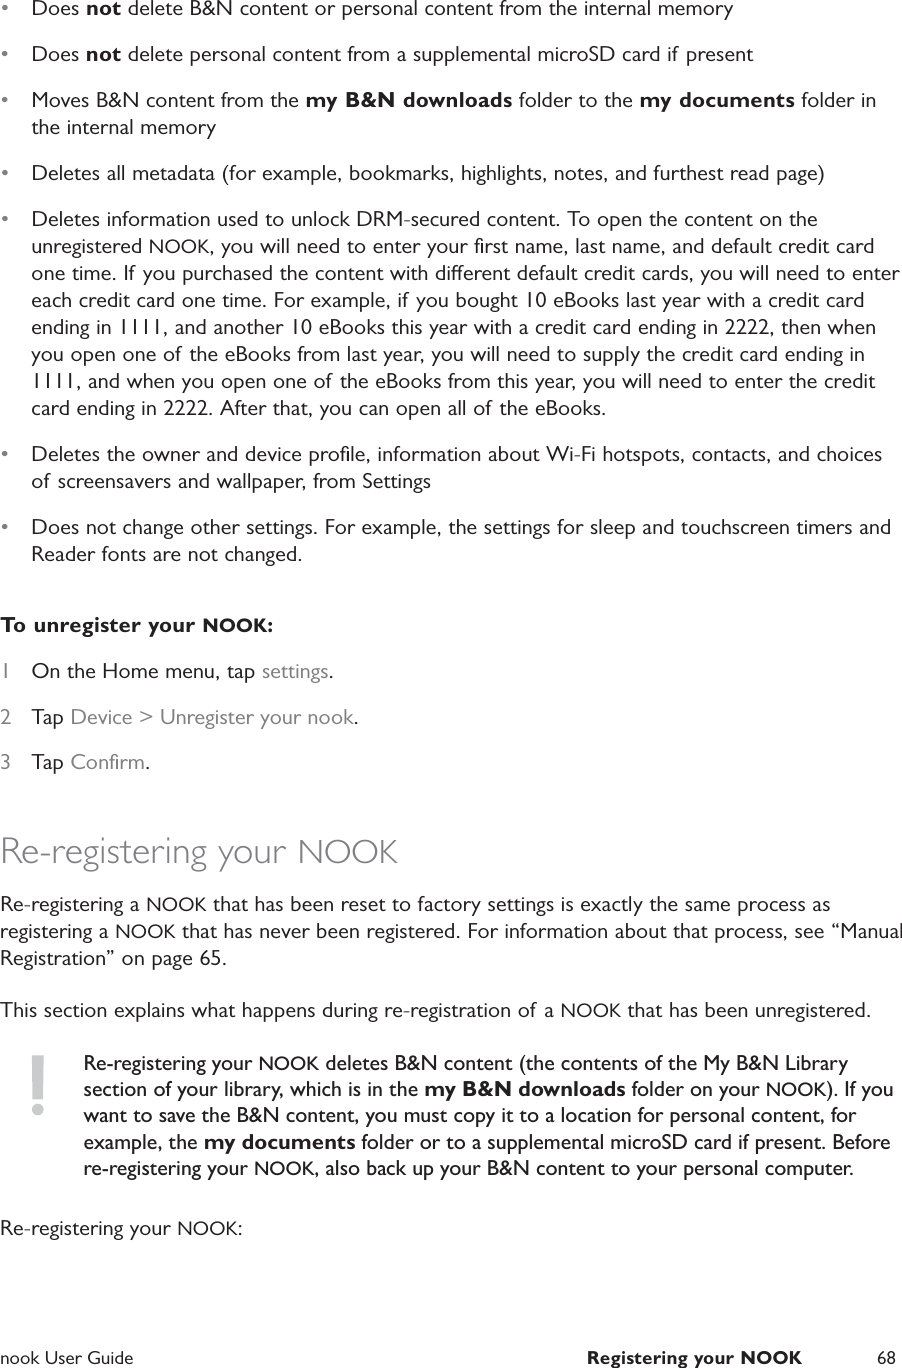  nook User Guide  Registering your NOOK 68•  Does not delete B&amp;N content or personal content from the internal memory•  Does not delete personal content from a supplemental microSD card if present•  Moves B&amp;N content from the my B&amp;N downloads folder to the my documents folder in the internal memory•  Deletes all metadata (for example, bookmarks, highlights, notes, and furthest read page)•  Deletes information used to unlock DRM-secured content. To open the content on the unregistered NOOK, you will need to enter your ﬁrst name, last name, and default credit card one time. If you purchased the content with dierent default credit cards, you will need to enter each credit card one time. For example, if you bought 10 eBooks last year with a credit card ending in 1111, and another 10 eBooks this year with a credit card ending in 2222, then when you open one of the eBooks from last year, you will need to supply the credit card ending in 1111, and when you open one of the eBooks from this year, you will need to enter the credit card ending in 2222. After that, you can open all of the eBooks.•  Deletes the owner and device proﬁle, information about Wi-Fi hotspots, contacts, and choices of screensavers and wallpaper, from Settings•  Does not change other settings. For example, the settings for sleep and touchscreen timers and Reader fonts are not changed. To unregister your NOOK:1  On the Home menu, tap settings.2  Tap Device &gt; Unregister your nook.3  Tap Conﬁrm.Re-registering your NOOKRe-registering a NOOK that has been reset to factory settings is exactly the same process as registering a NOOK that has never been registered. For information about that process, see “Manual Registration” on page 65.This section explains what happens during re-registration of a NOOK that has been unregistered.Re-registering your NOOK deletes B&amp;N content (the contents of the My B&amp;N Library section of your library, which is in the my B&amp;N downloads folder on your NOOK). If you want to save the B&amp;N content, you must copy it to a location for personal content, for example, the my documents folder or to a supplemental microSD card if present. Before re-registering your NOOK, also back up your B&amp;N content to your personal computer.Re-registering your NOOK: